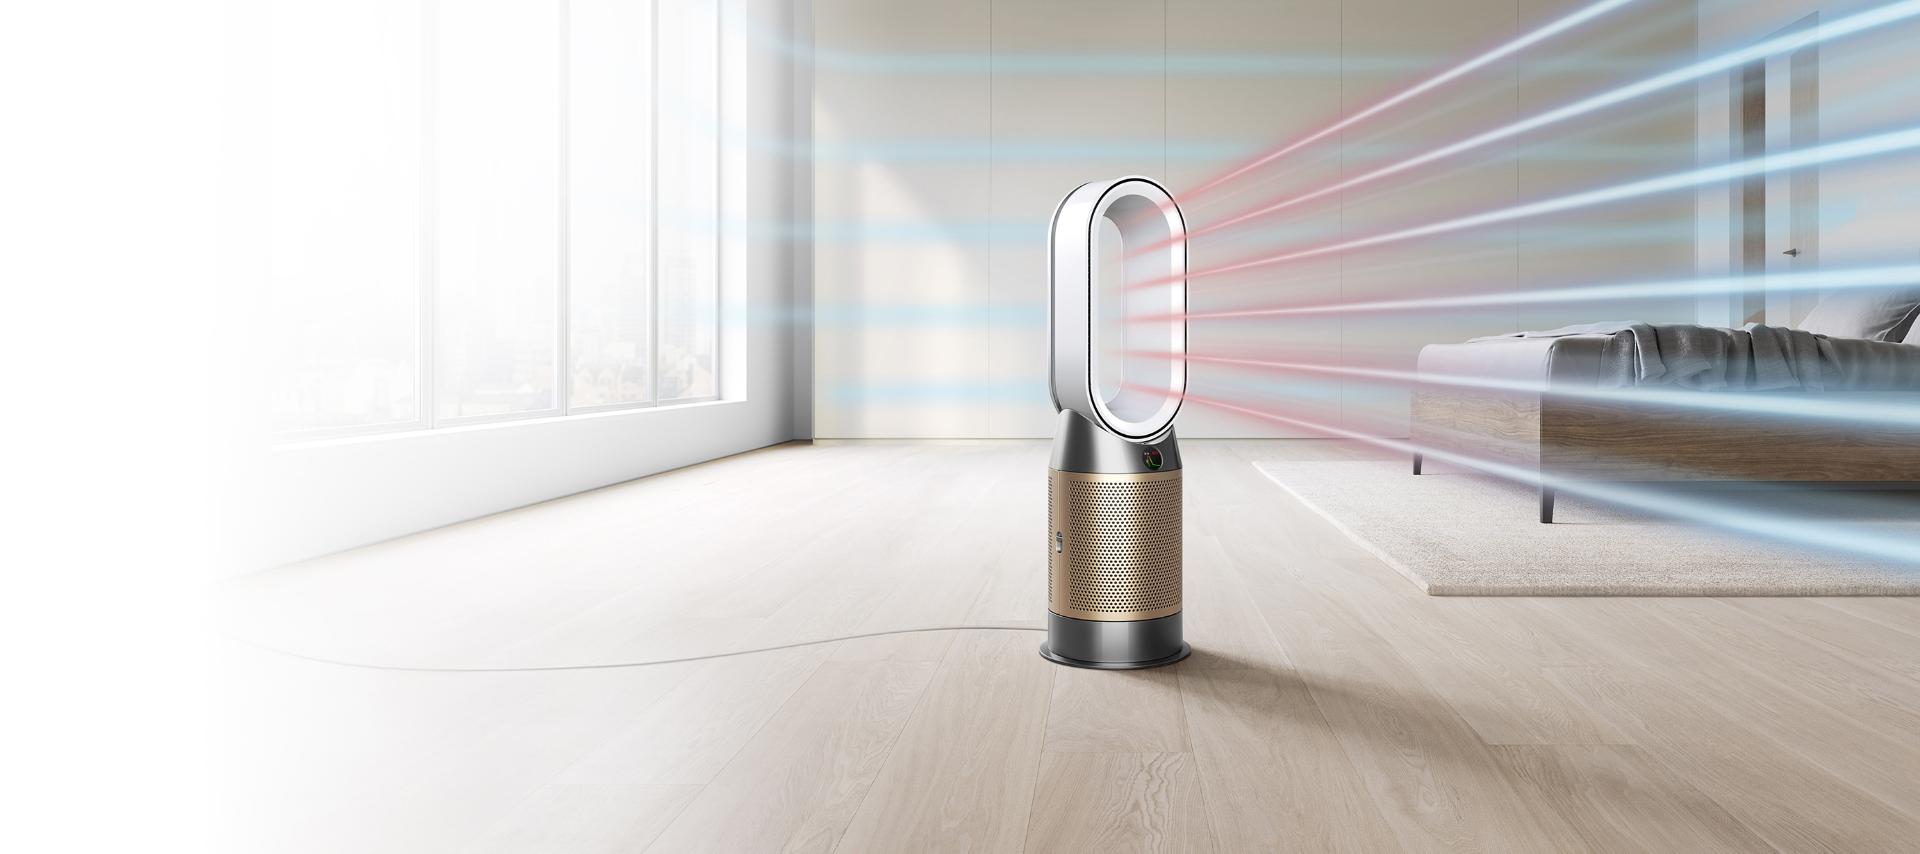 Dyson Purifier projecting heated purified air around a hotel room